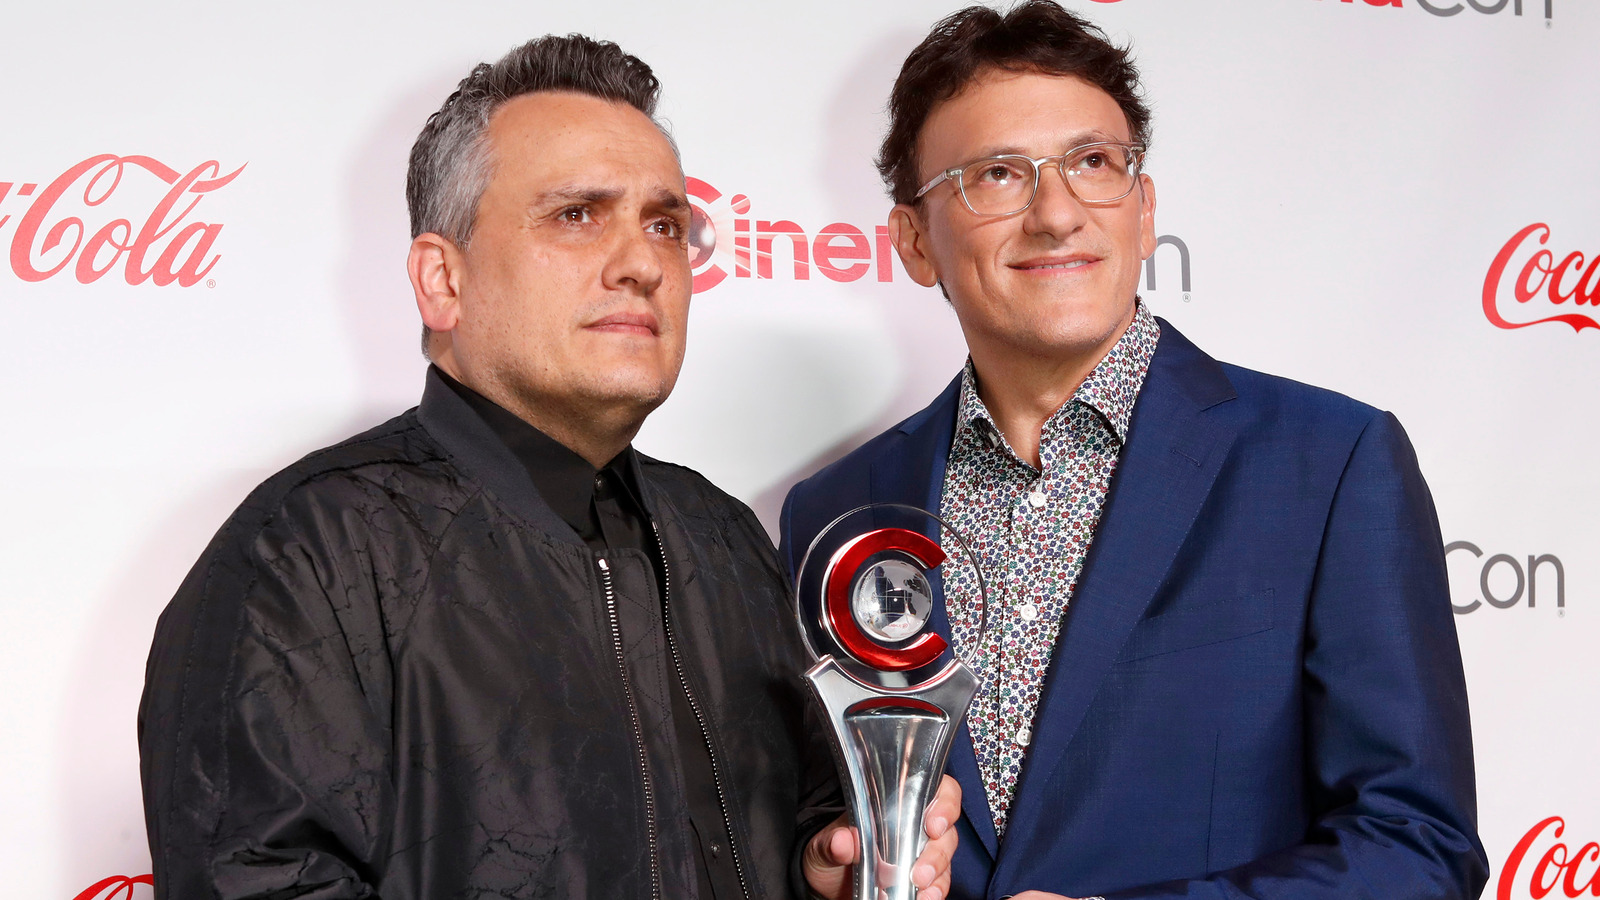 Russo Brothers Won't Direct Phase 6 Avengers Movies, Kevin Feige Confirms